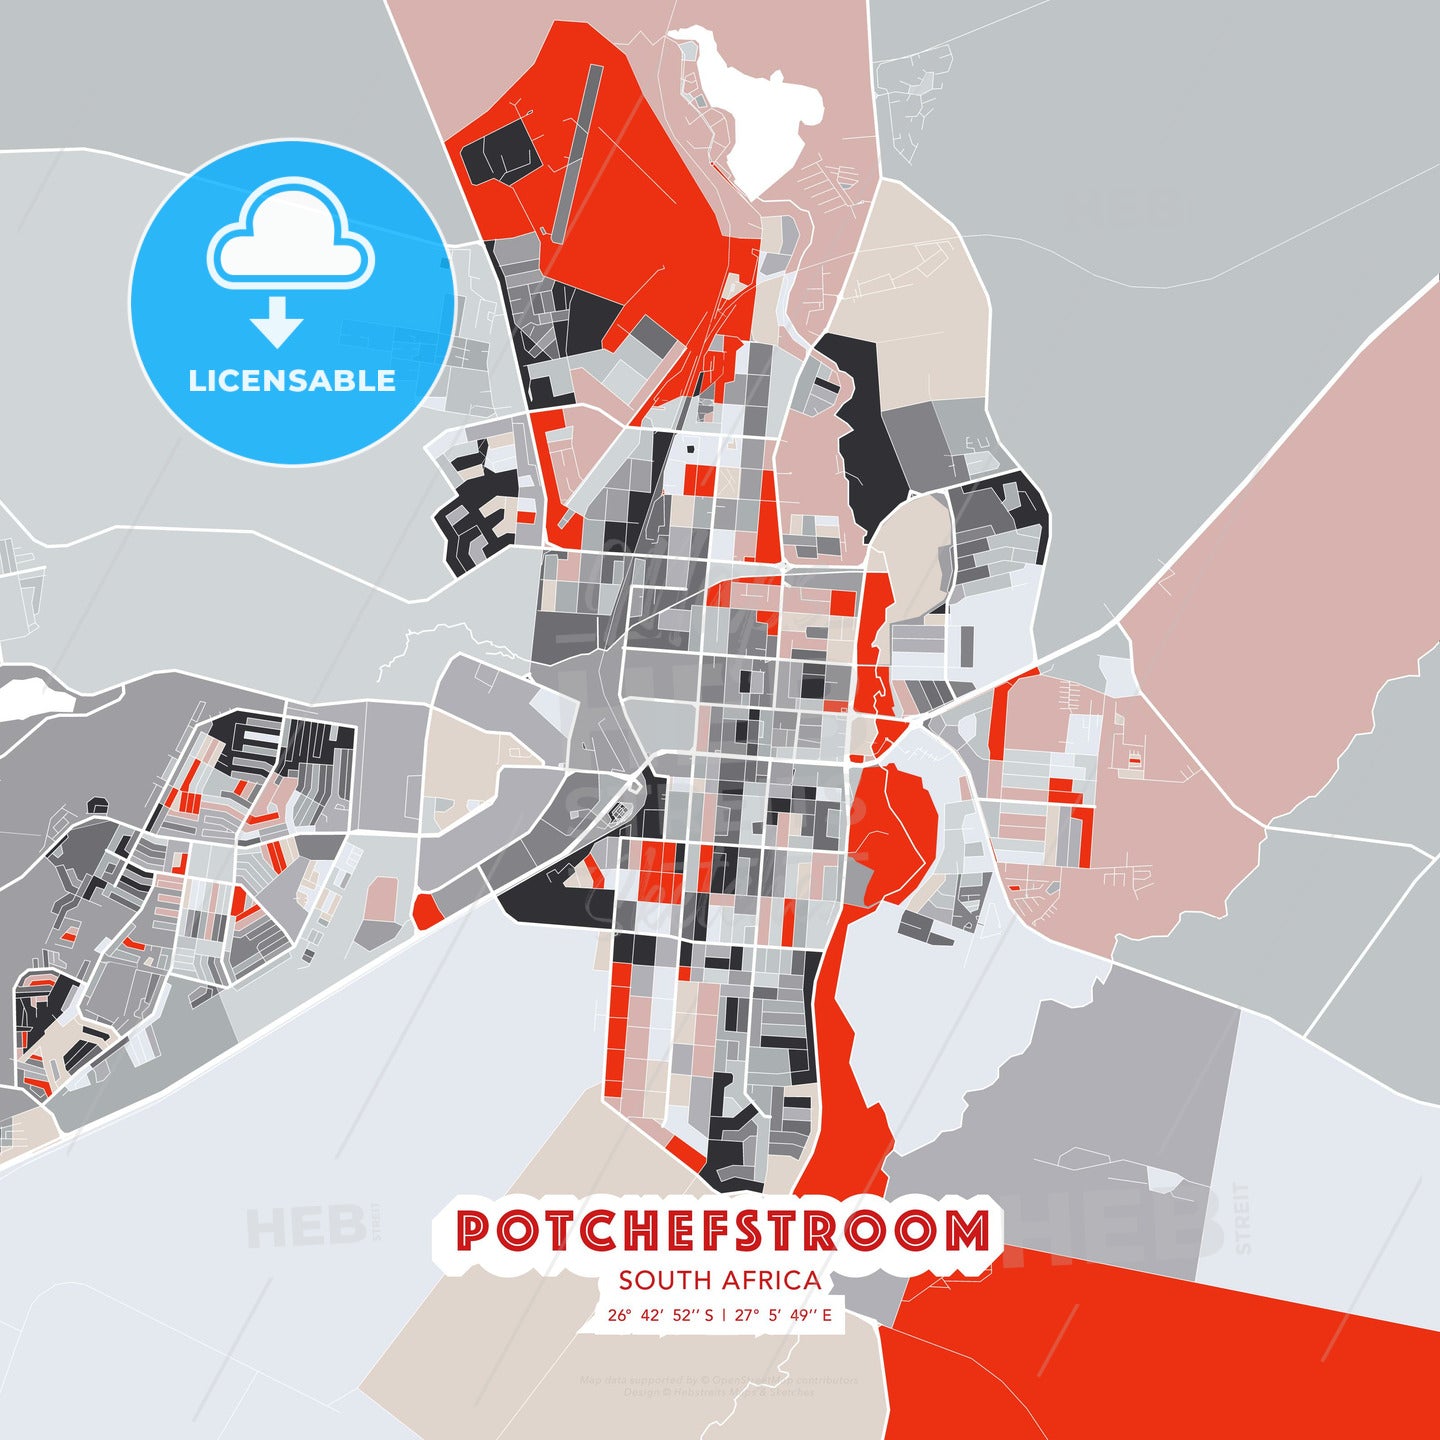 Potchefstroom, South Africa, modern map - HEBSTREITS Sketches